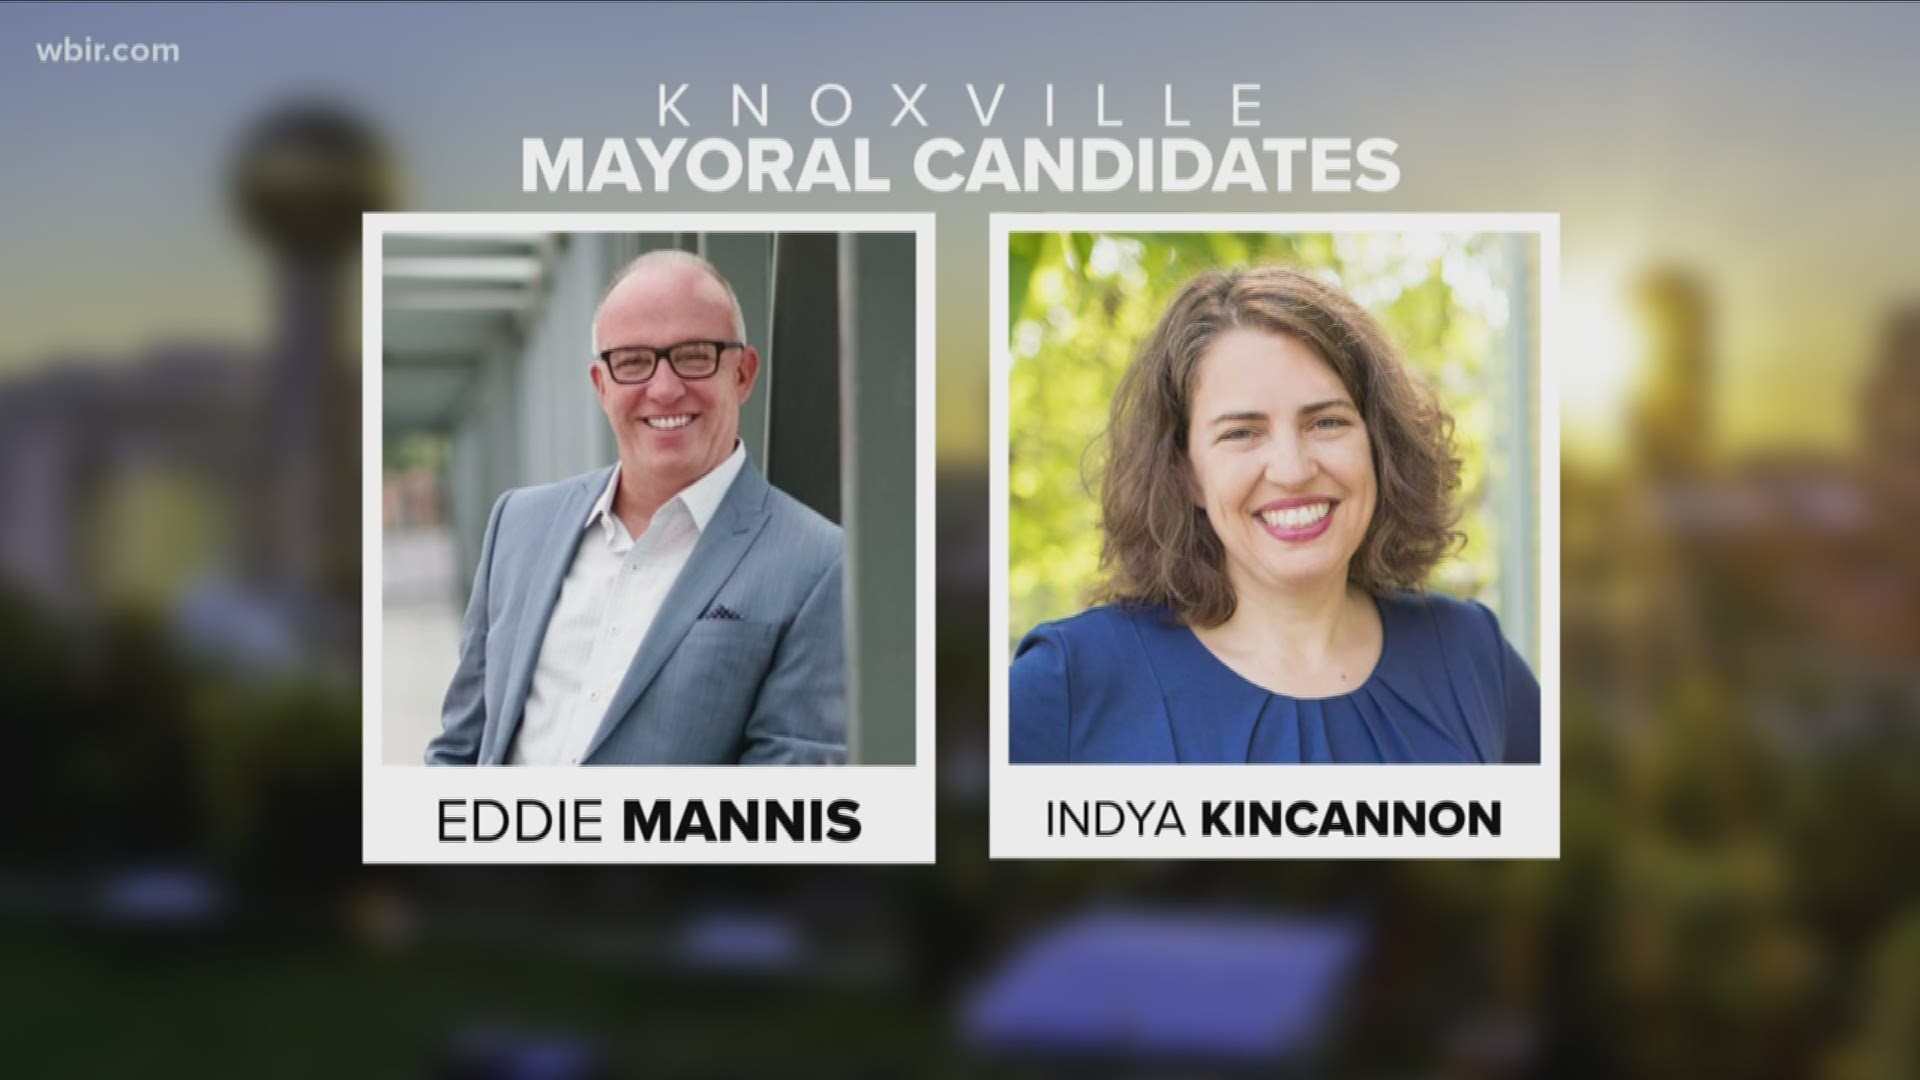 In your morning headlines- the results are in for the Knoxville mayoral primary. Eddie Mannis and Indya Kincannon are moving on to the November regular election.